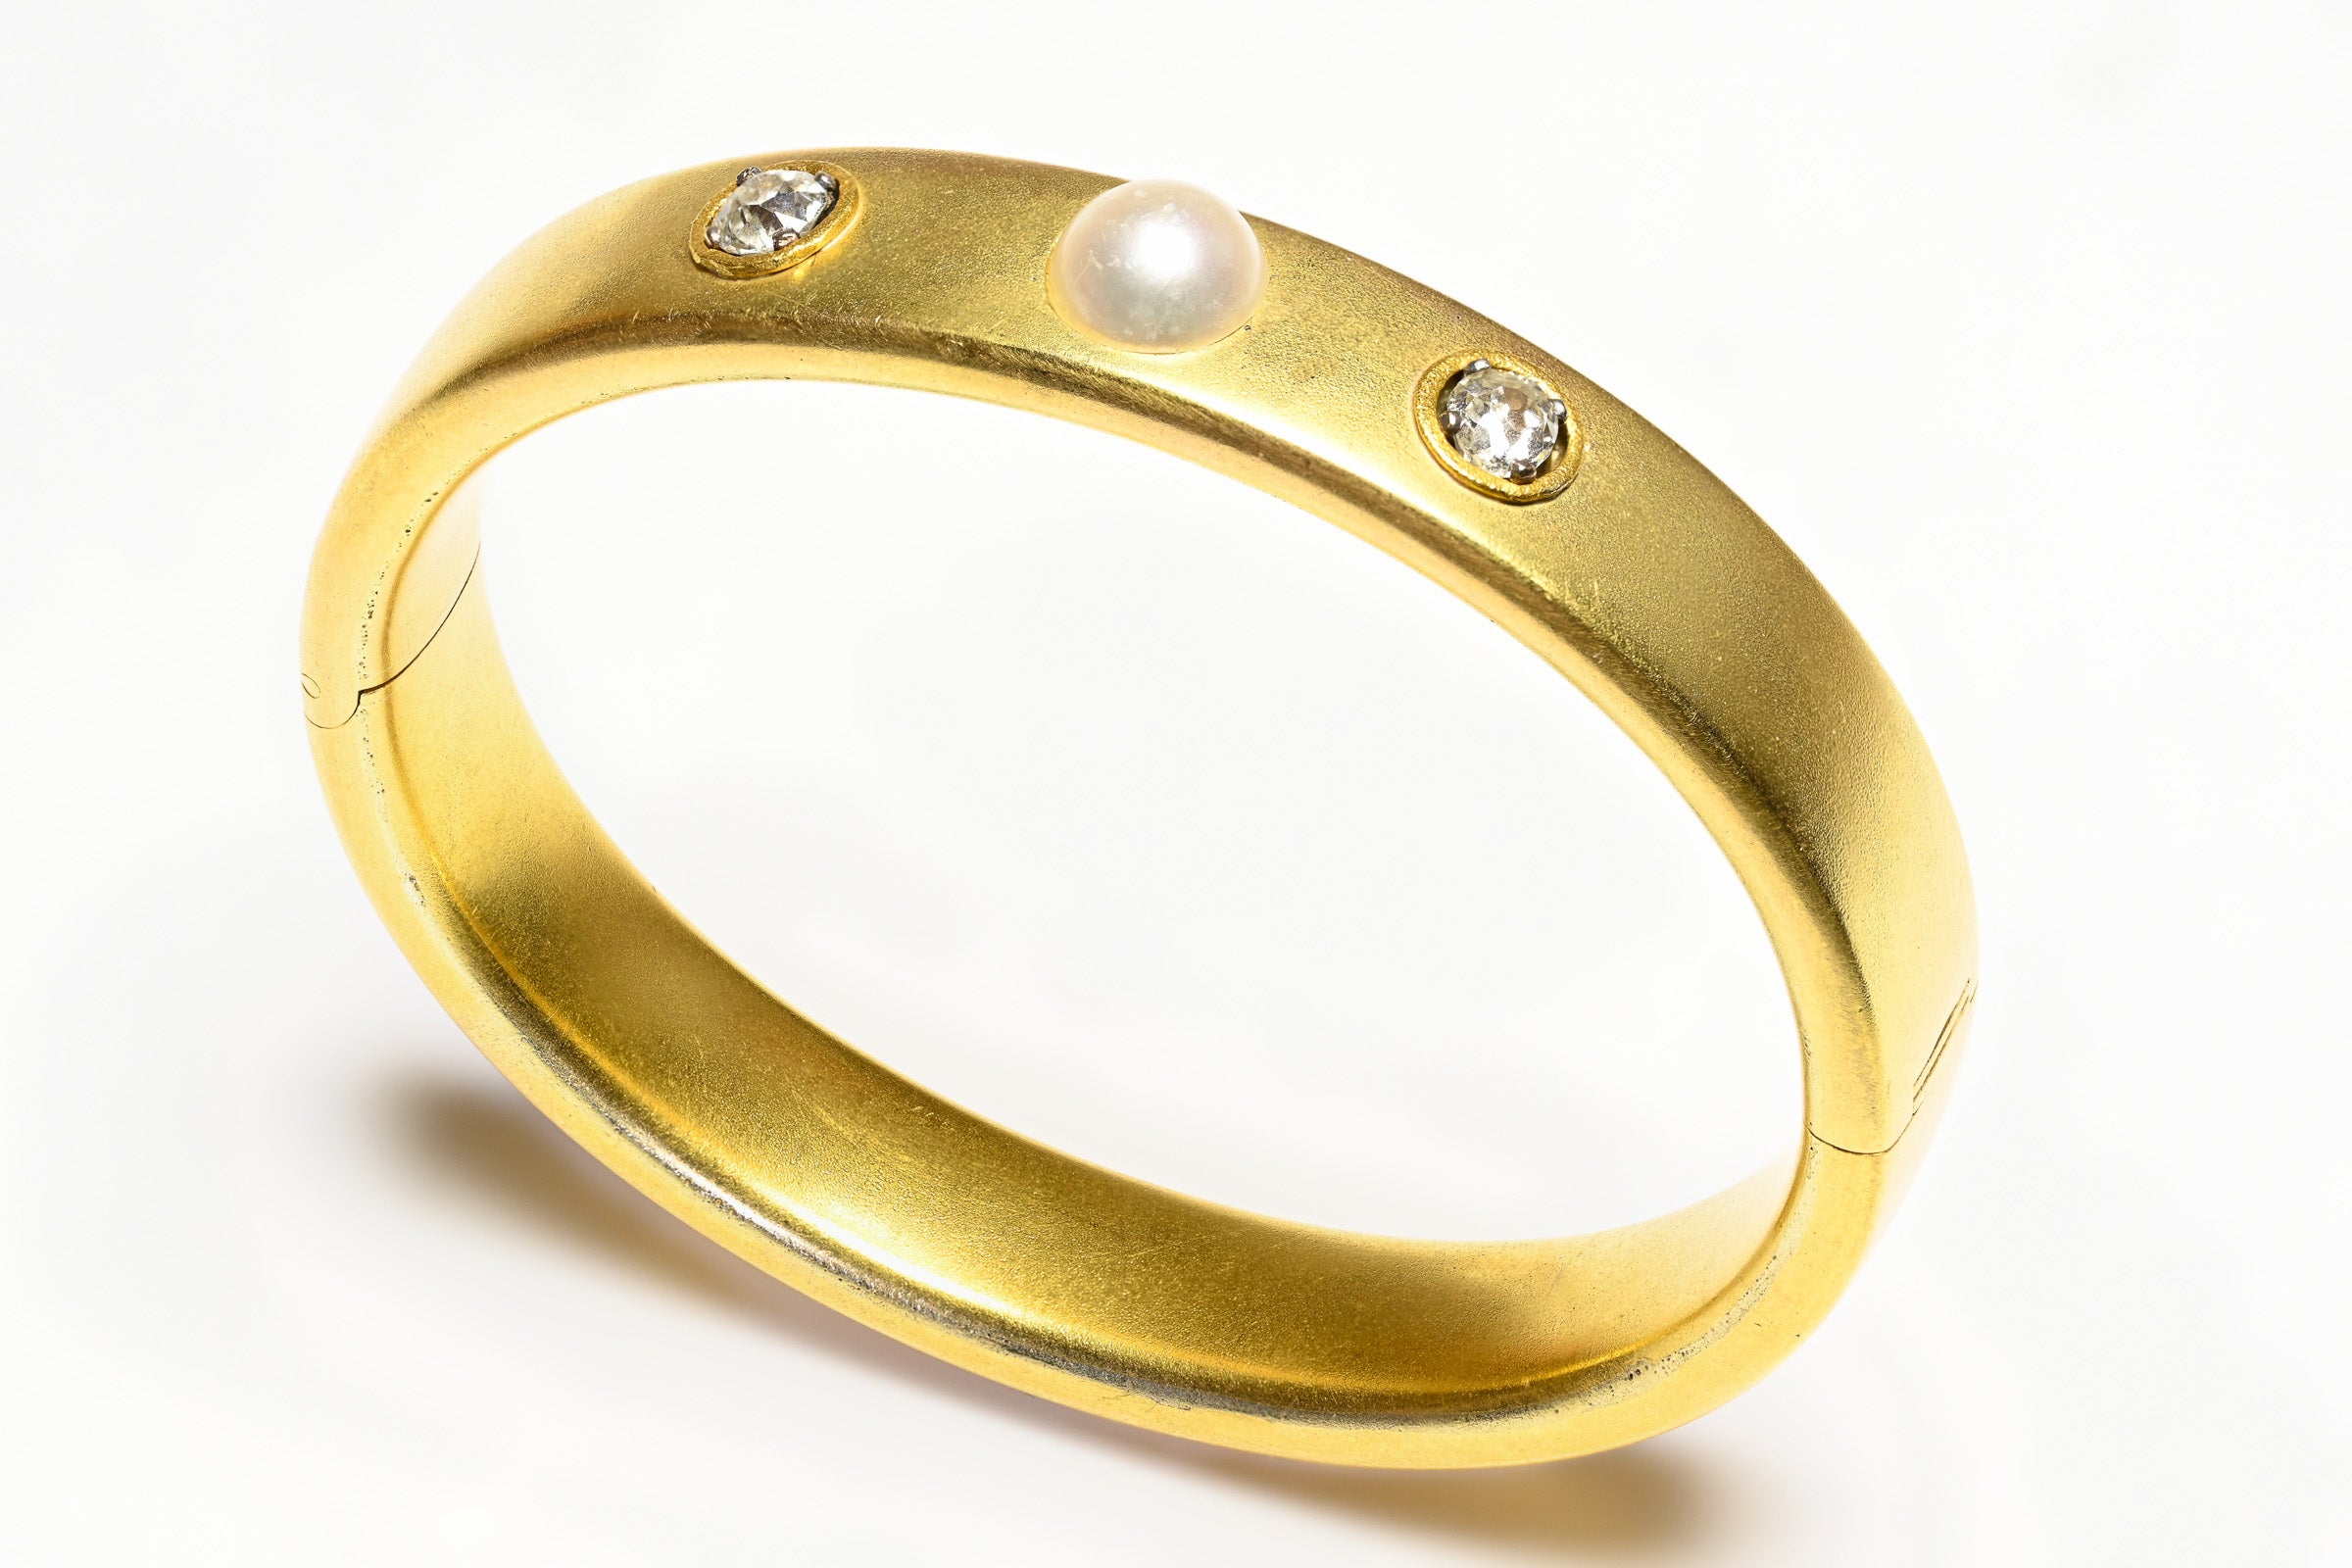 The Benefits of Investing in Fine Antique Gold Jewelry